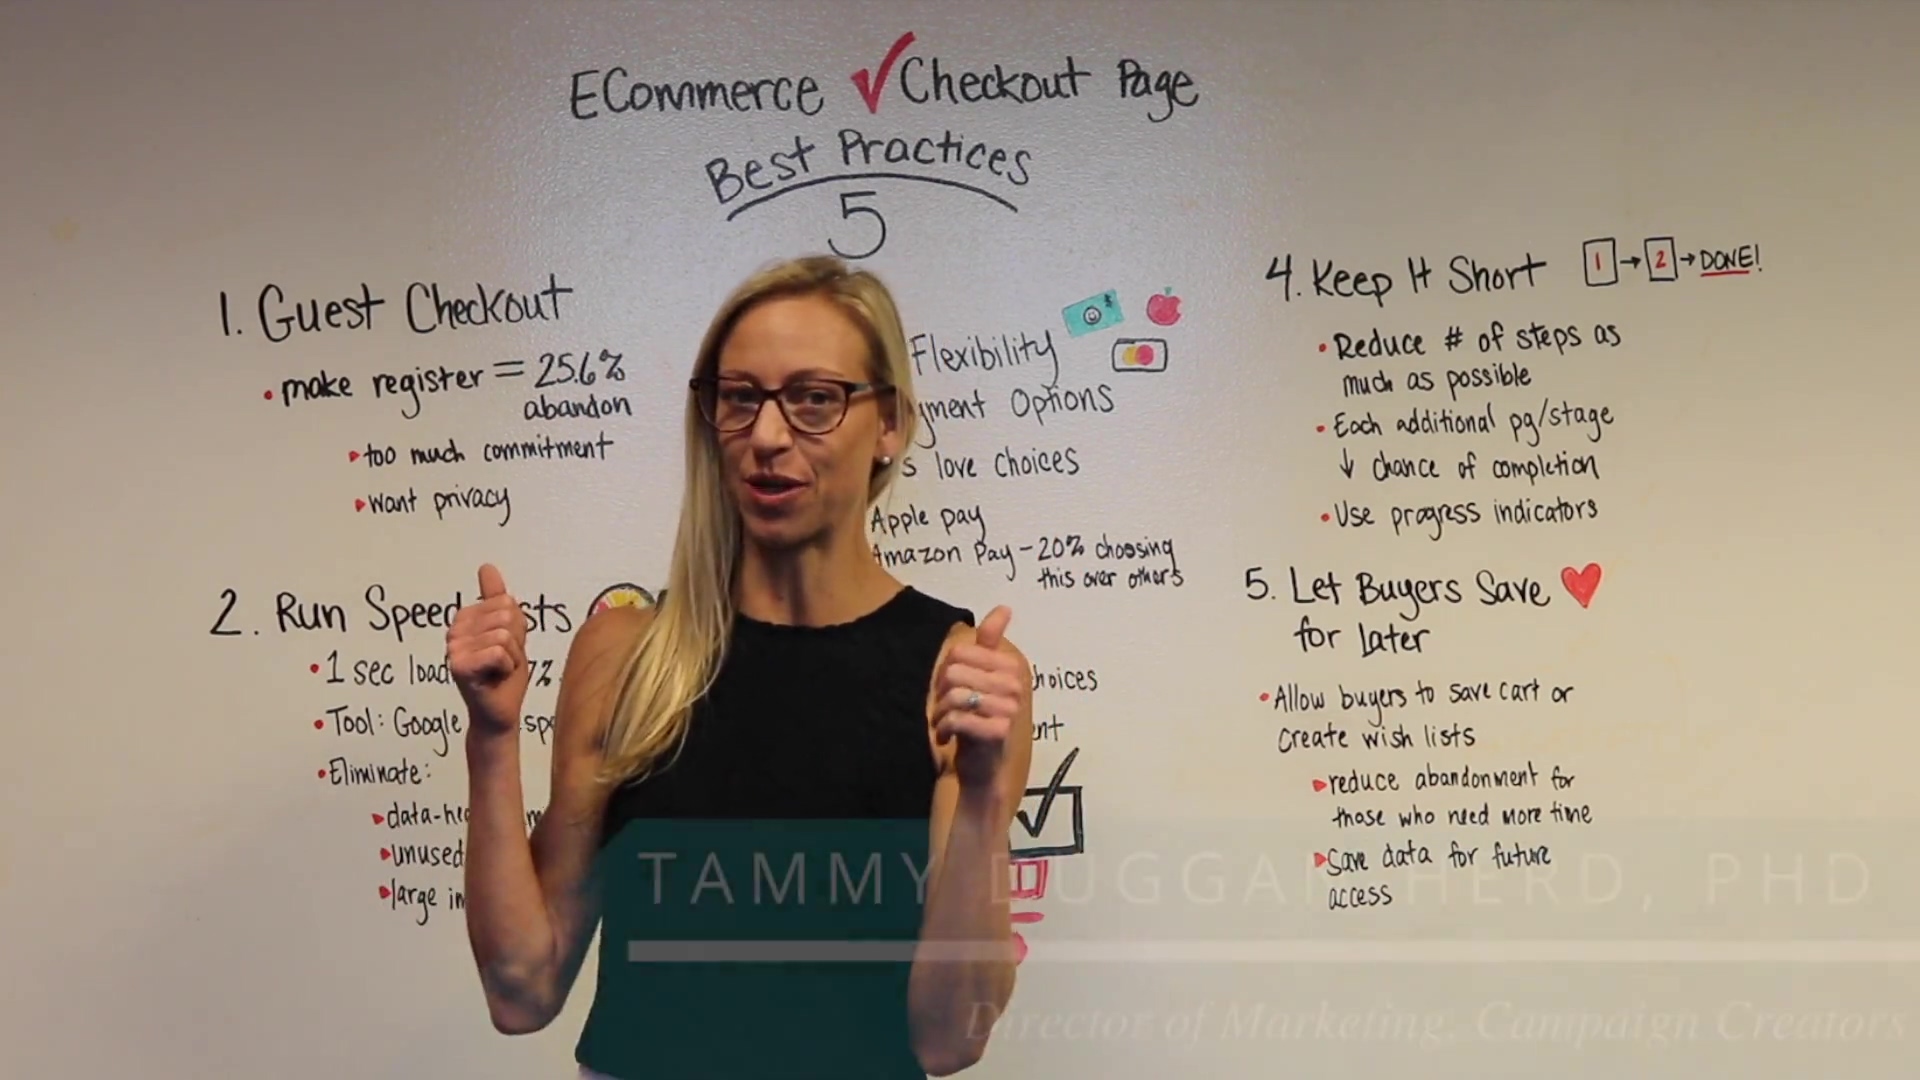 Whiteboard-Ecommerce-Checkout-Best-Practices-LinkedIn-3